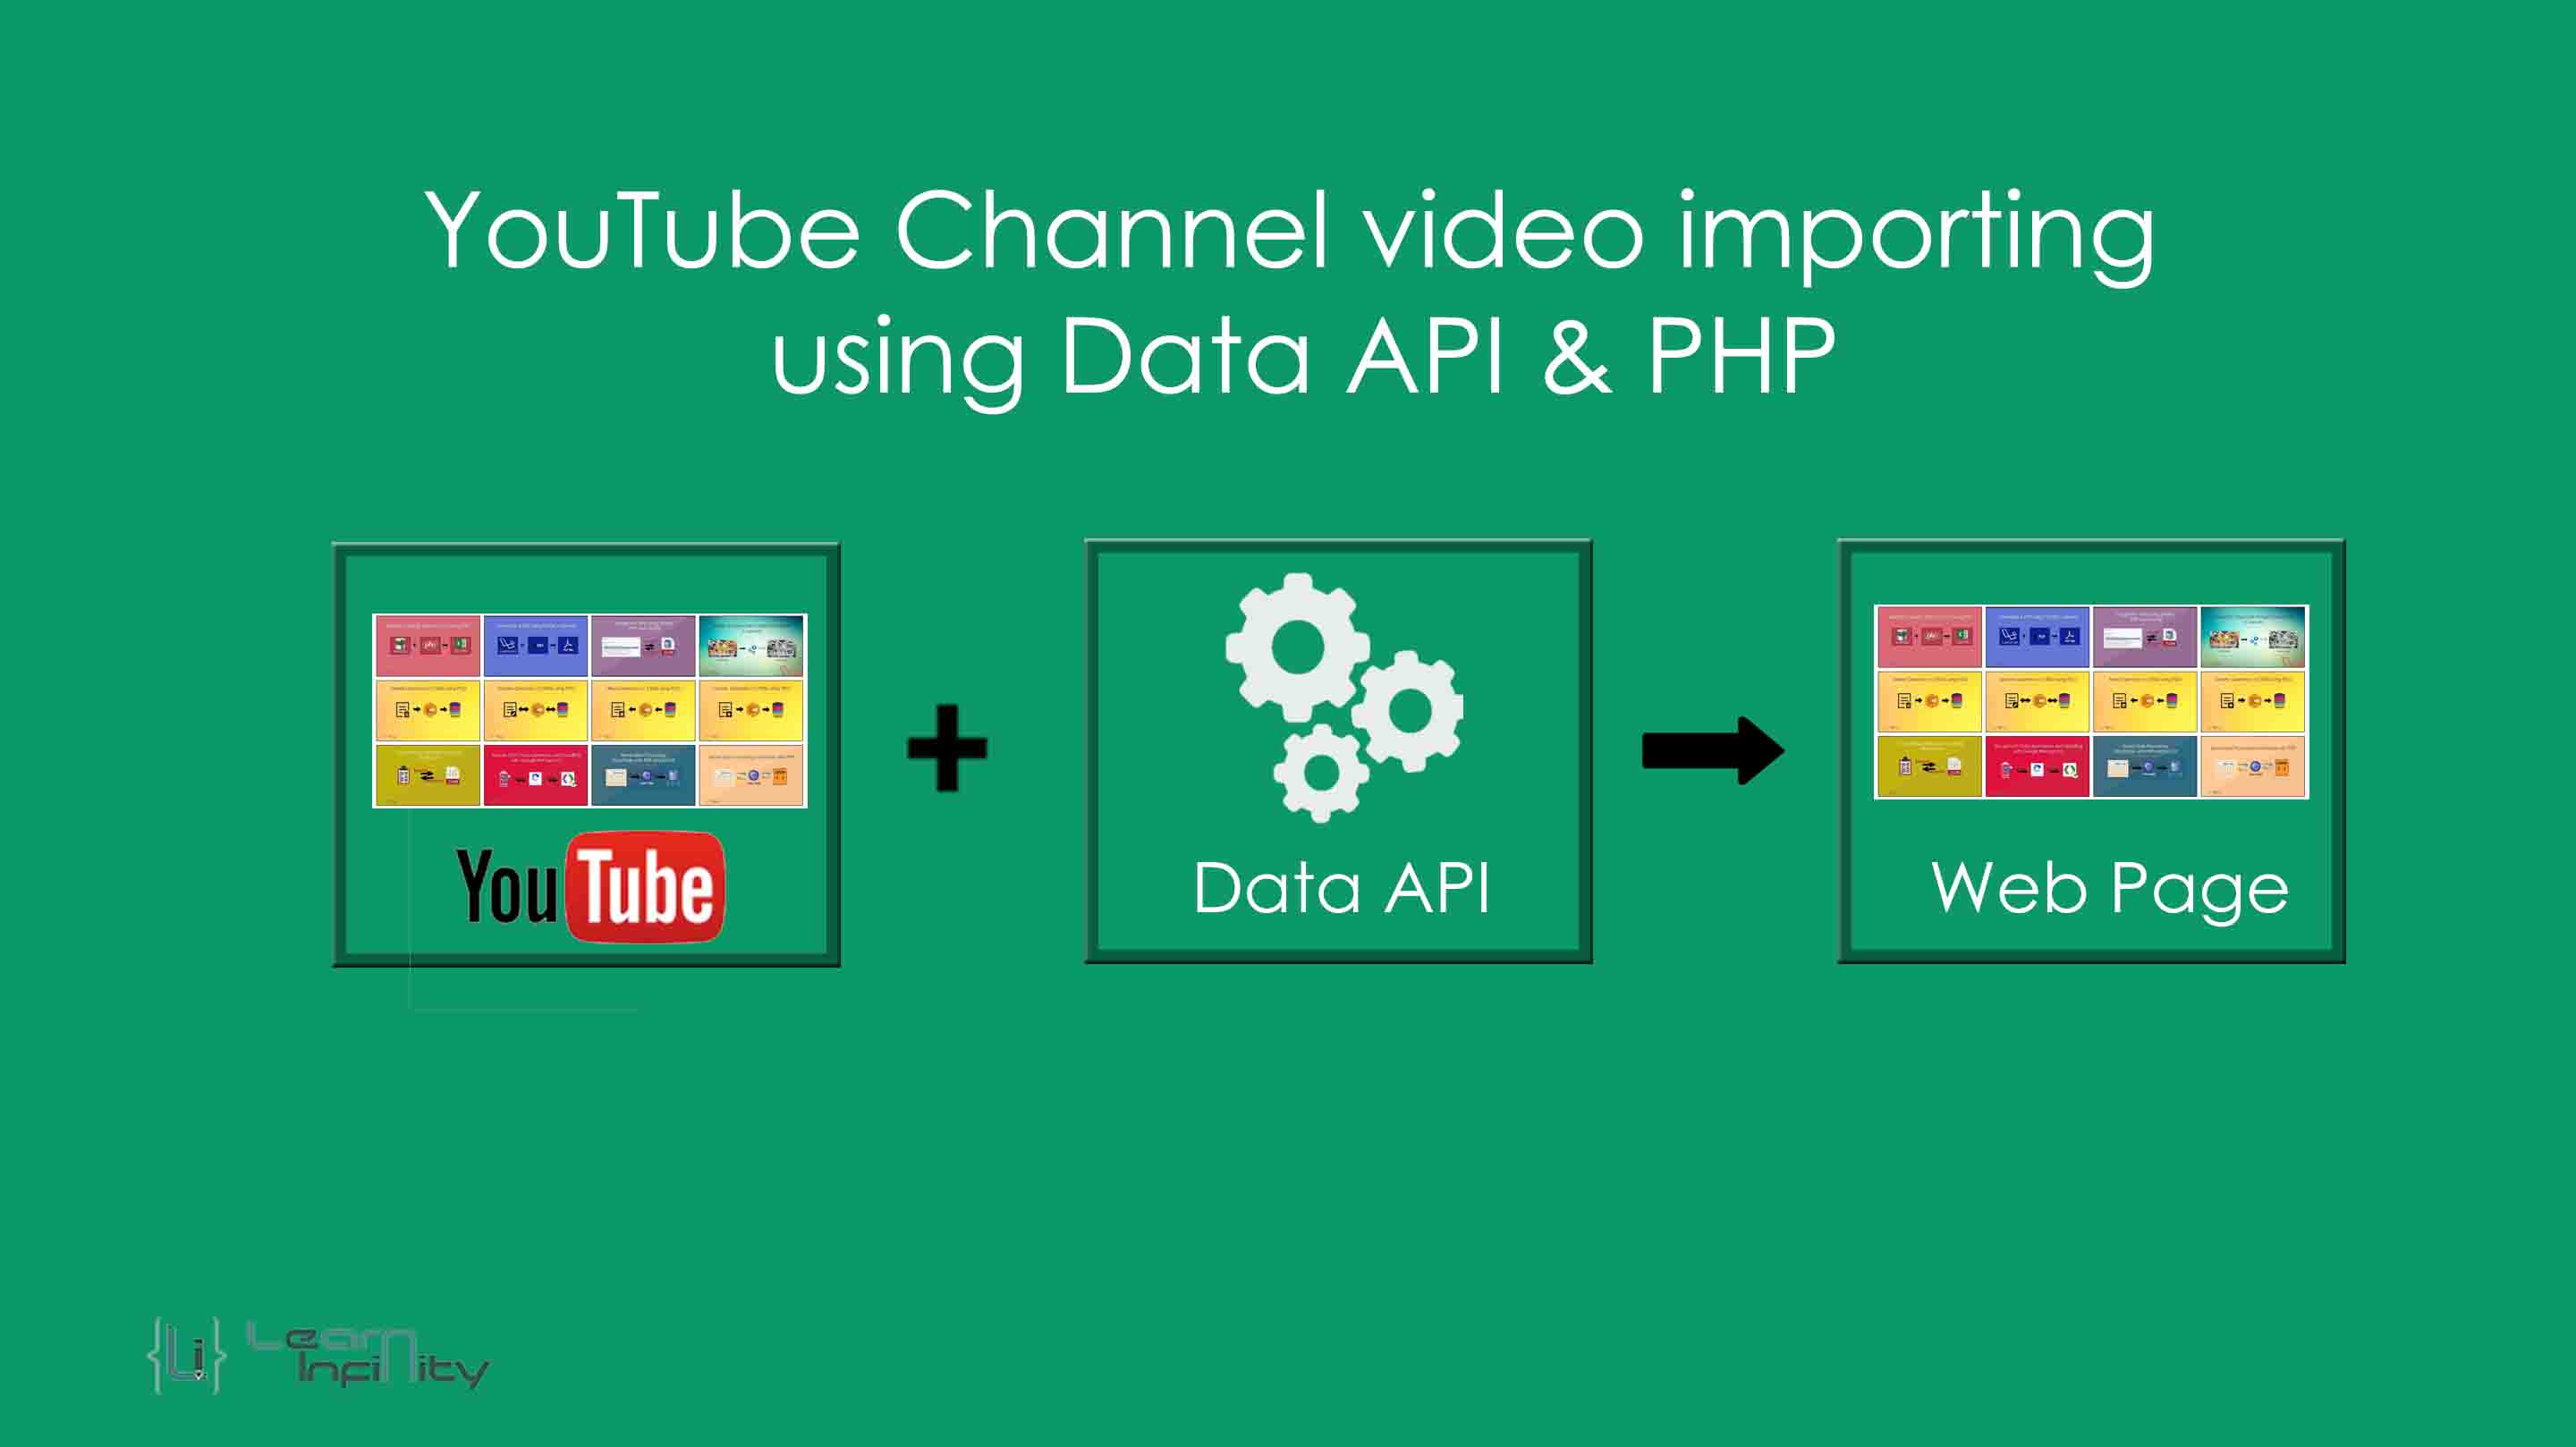 YouTube Channel video importing using Data API & PHP